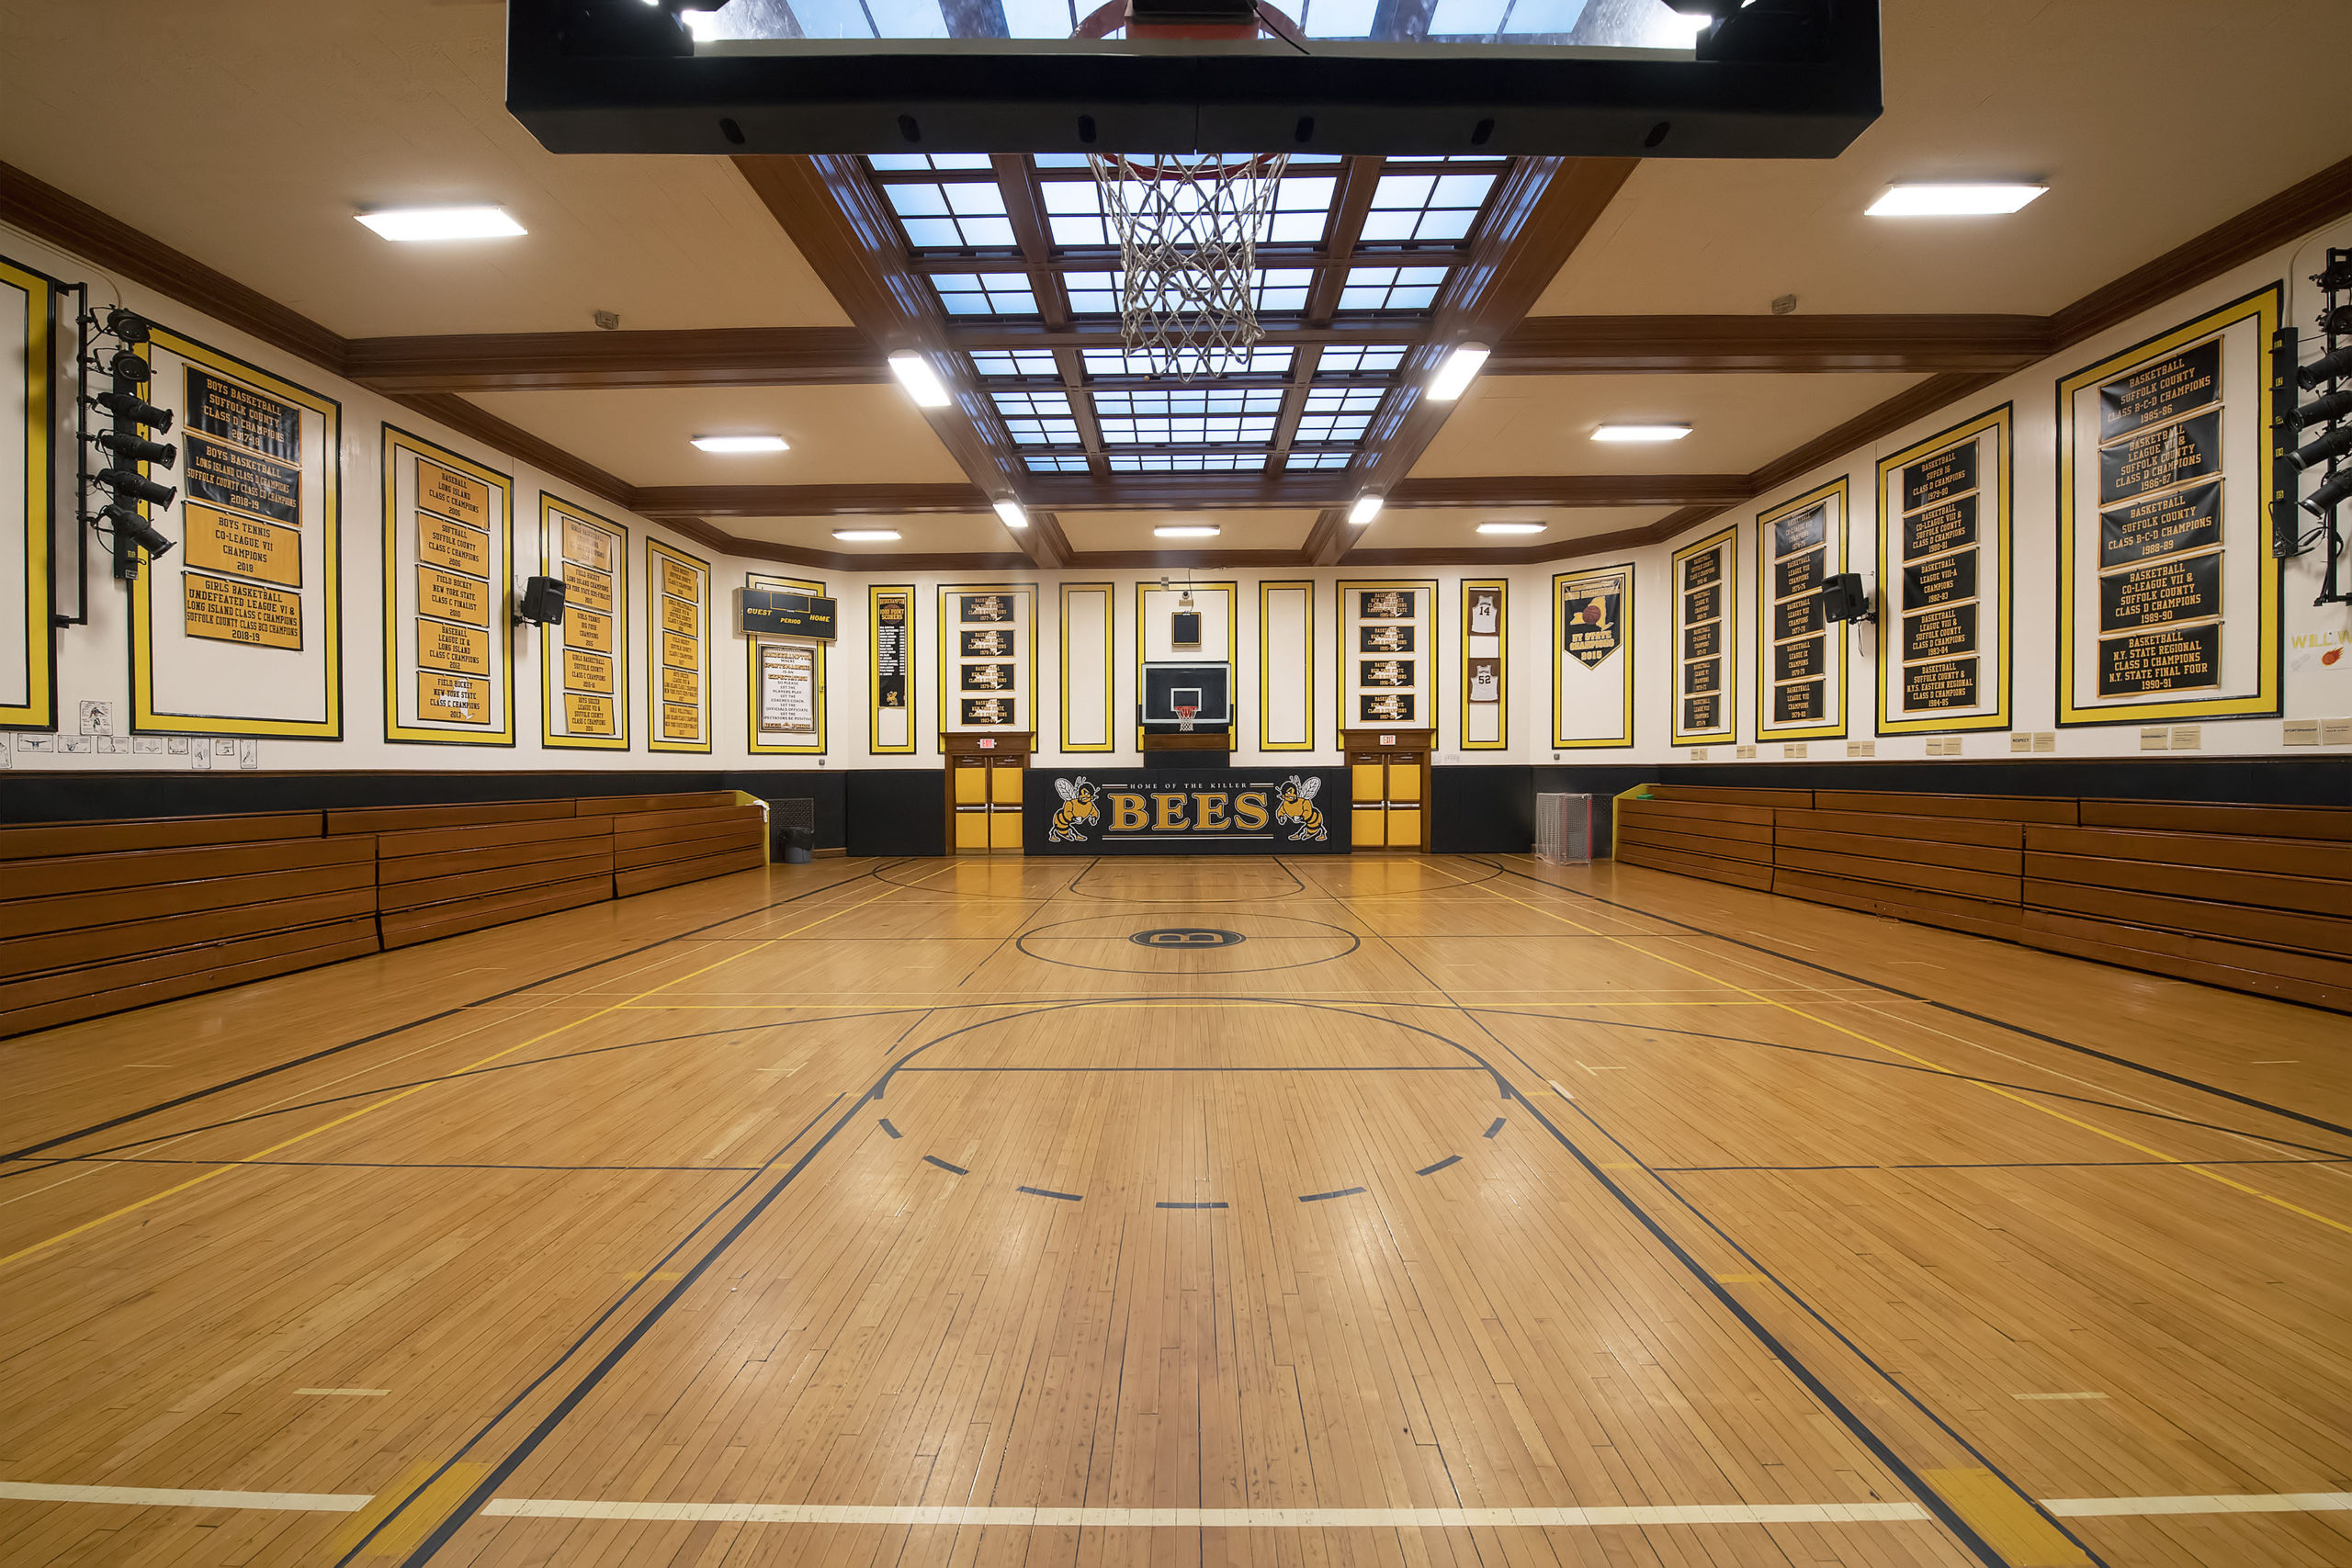 Approximately 4,000 square feet, the Hive measures 37 feet sideline to sideline and 55 feet baseline to baseline, 13 feet and 19 feet smaller, respectively, than a regulation-sized high school basketball court.